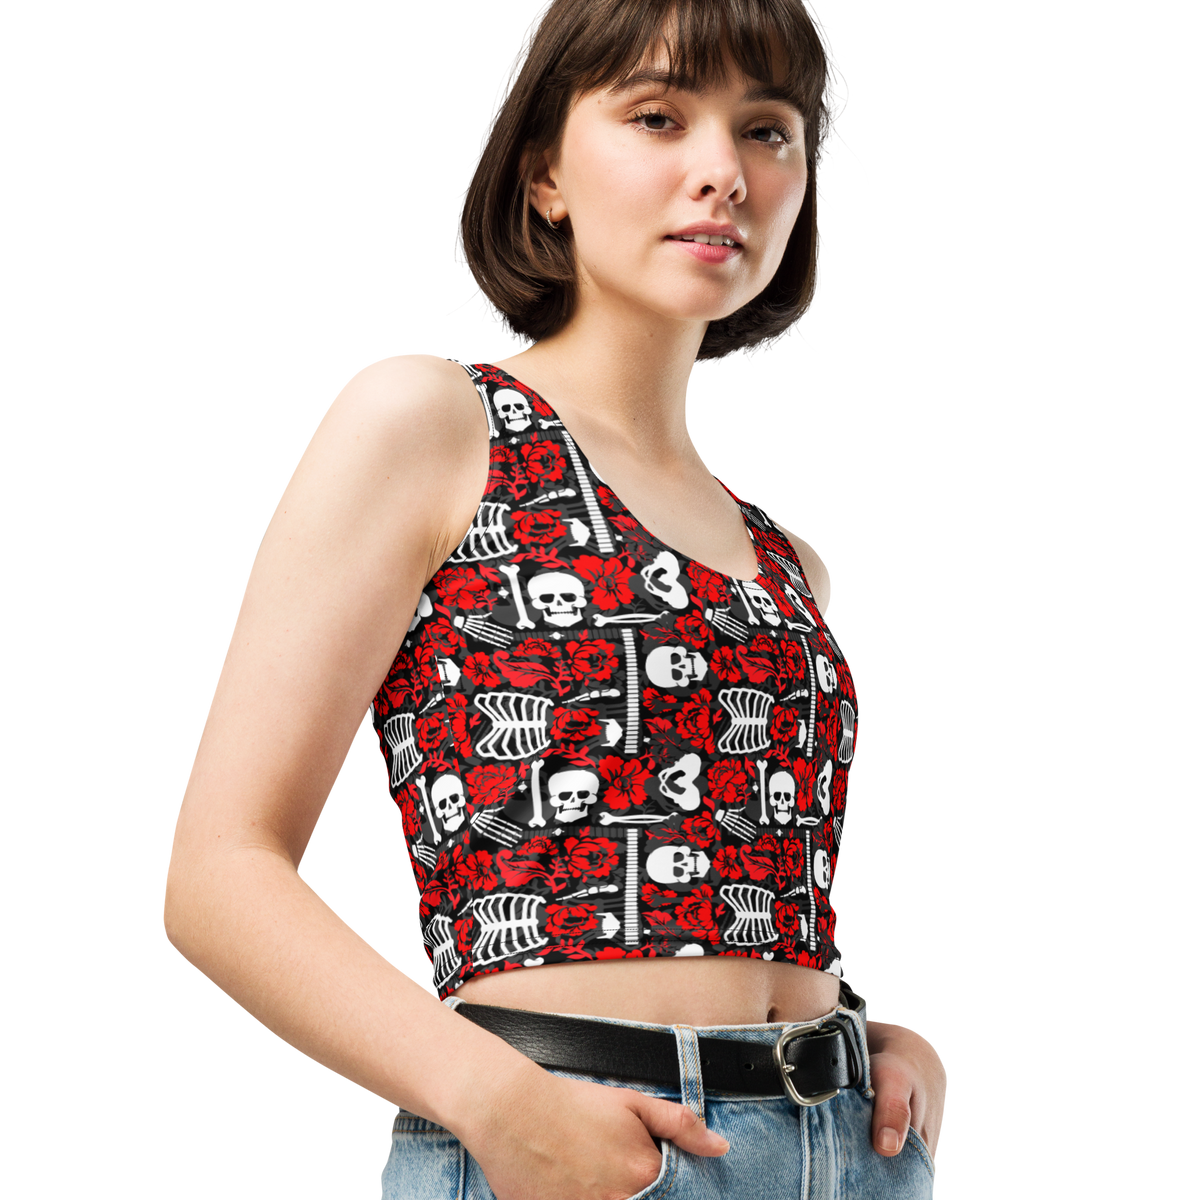 skull shirt  Skull crop top  rockabilly shirt  rockabilly crop top  rebellious shirt  punk rocker  hot topic  goth top  gift for her  gift for girlfriend  flowers shirt  flowers and skulls  emo top